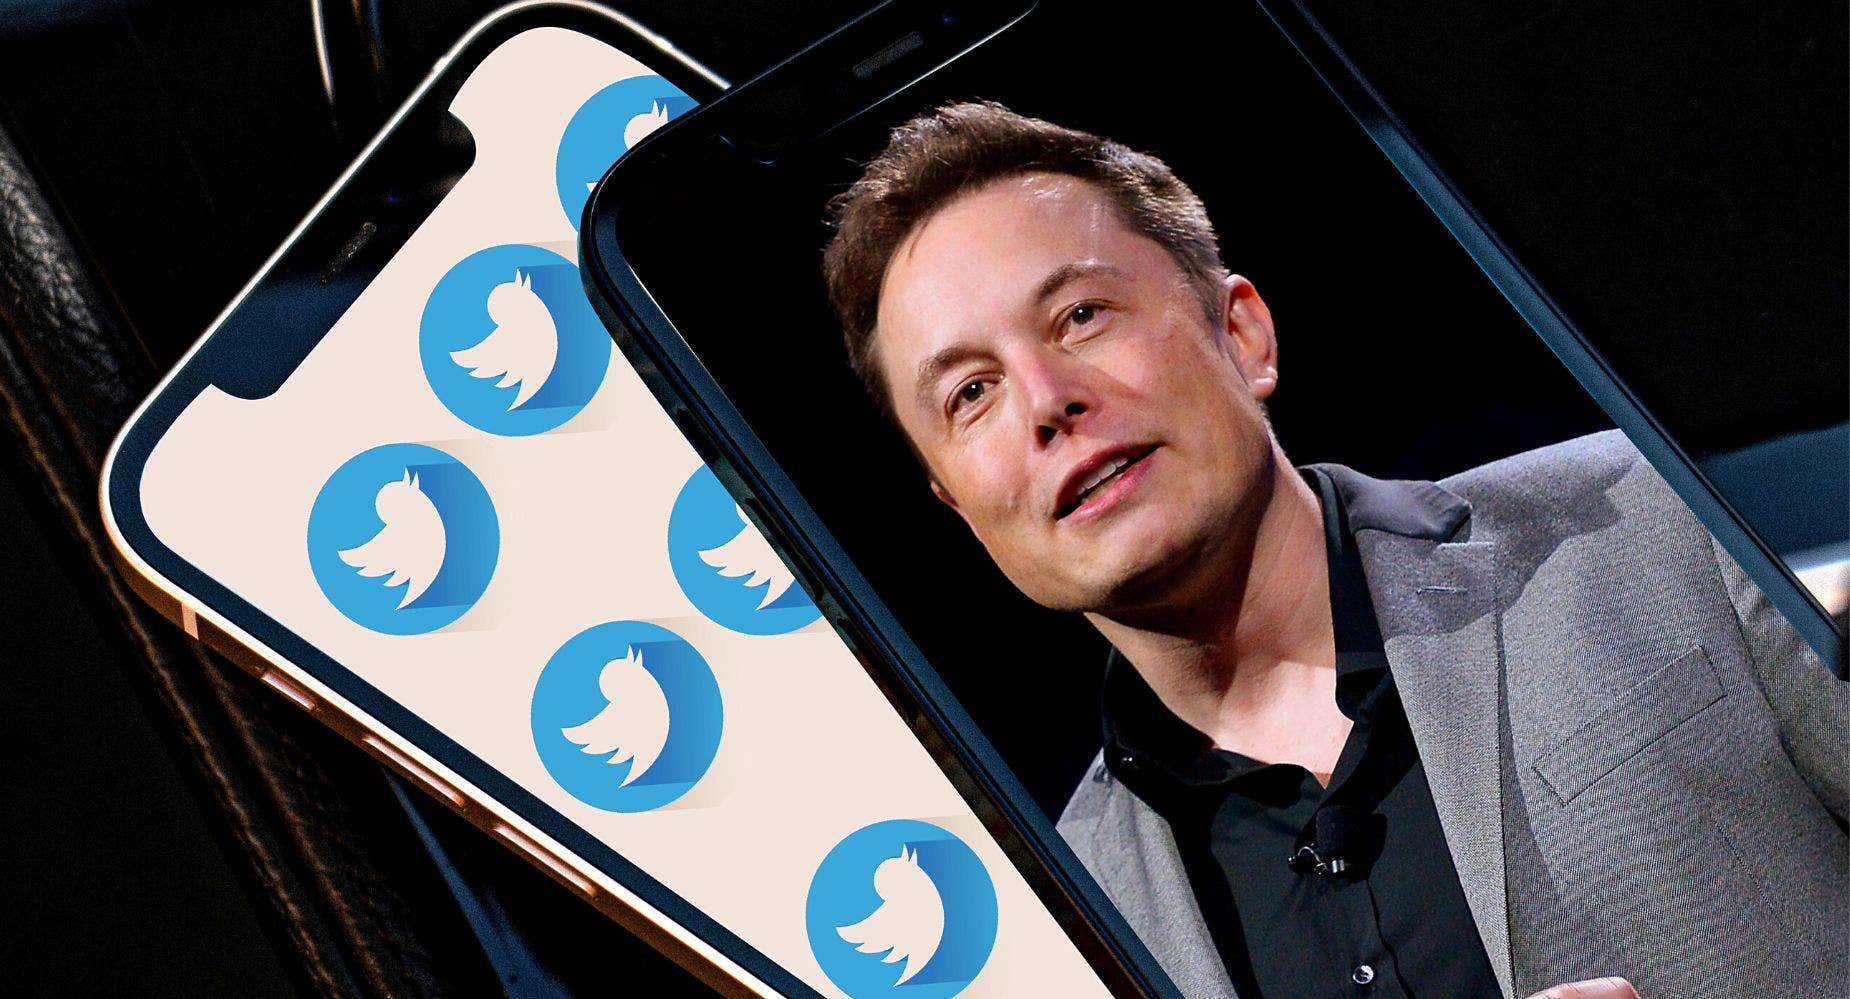 Advertisers Are Secretly Fearing Twitter With Musk At The Helm - And He Needs Them